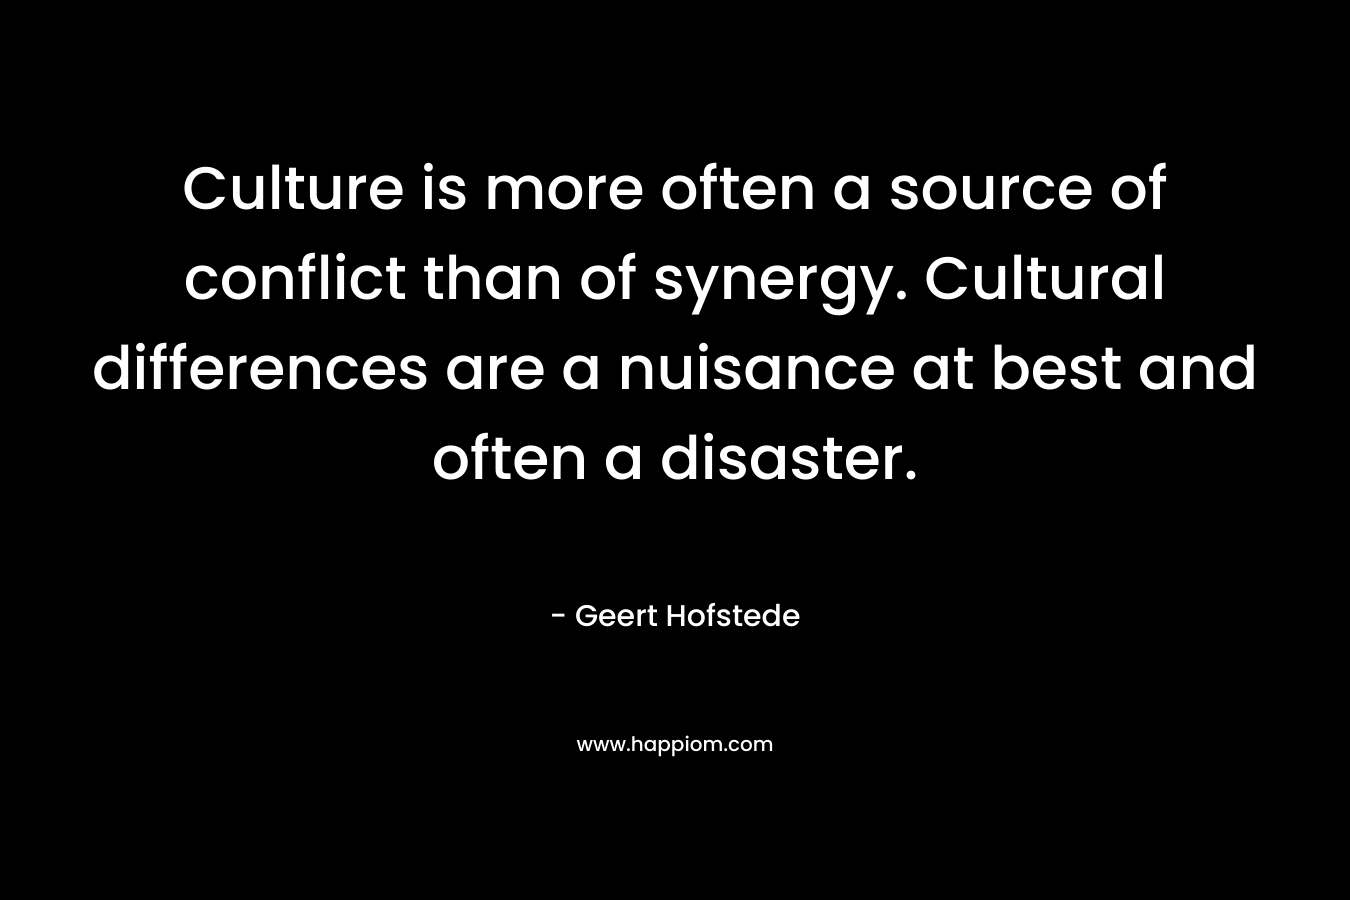 Culture is more often a source of conflict than of synergy. Cultural differences are a nuisance at best and often a disaster.